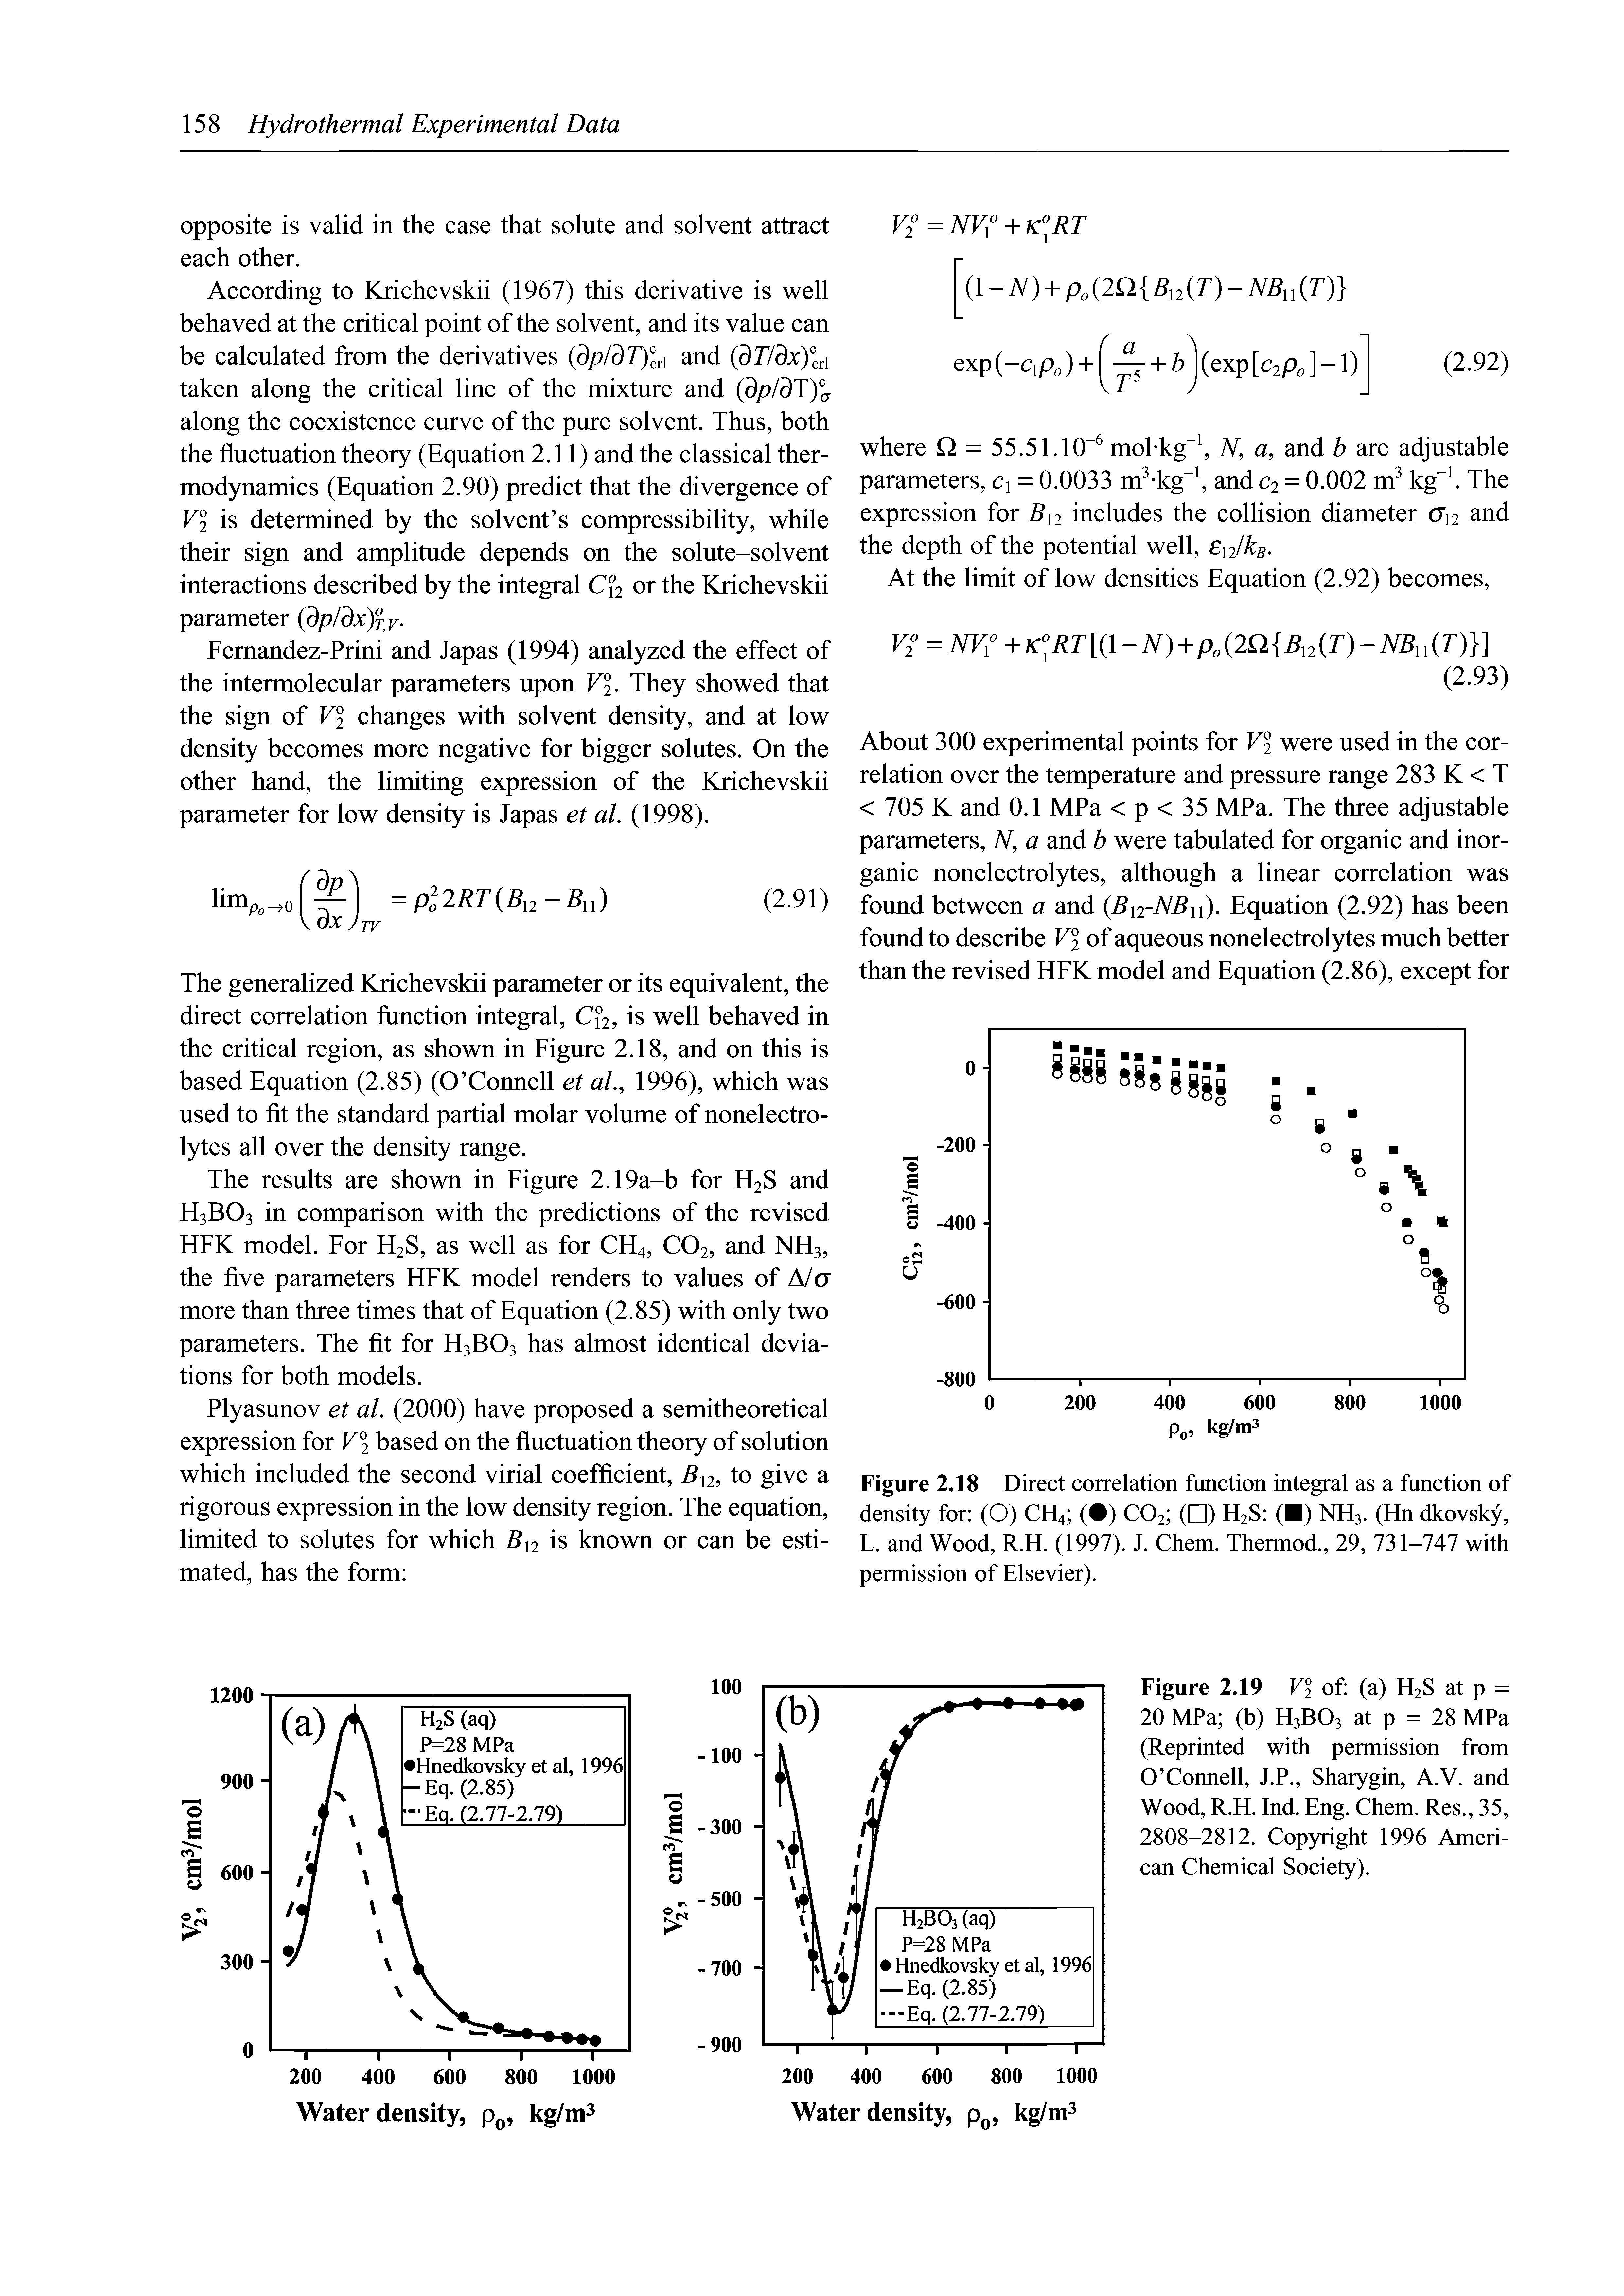 Figure 2.18 Direct correlation function integral as a function of density for (O) CH4 ( ) CO2 ( ) H2S ( ) NH3. (Hn dkovsky, L. and Wood, R.H. (1997). J. Chem. Thermod., 29, 731-747 with permission of Elsevier).